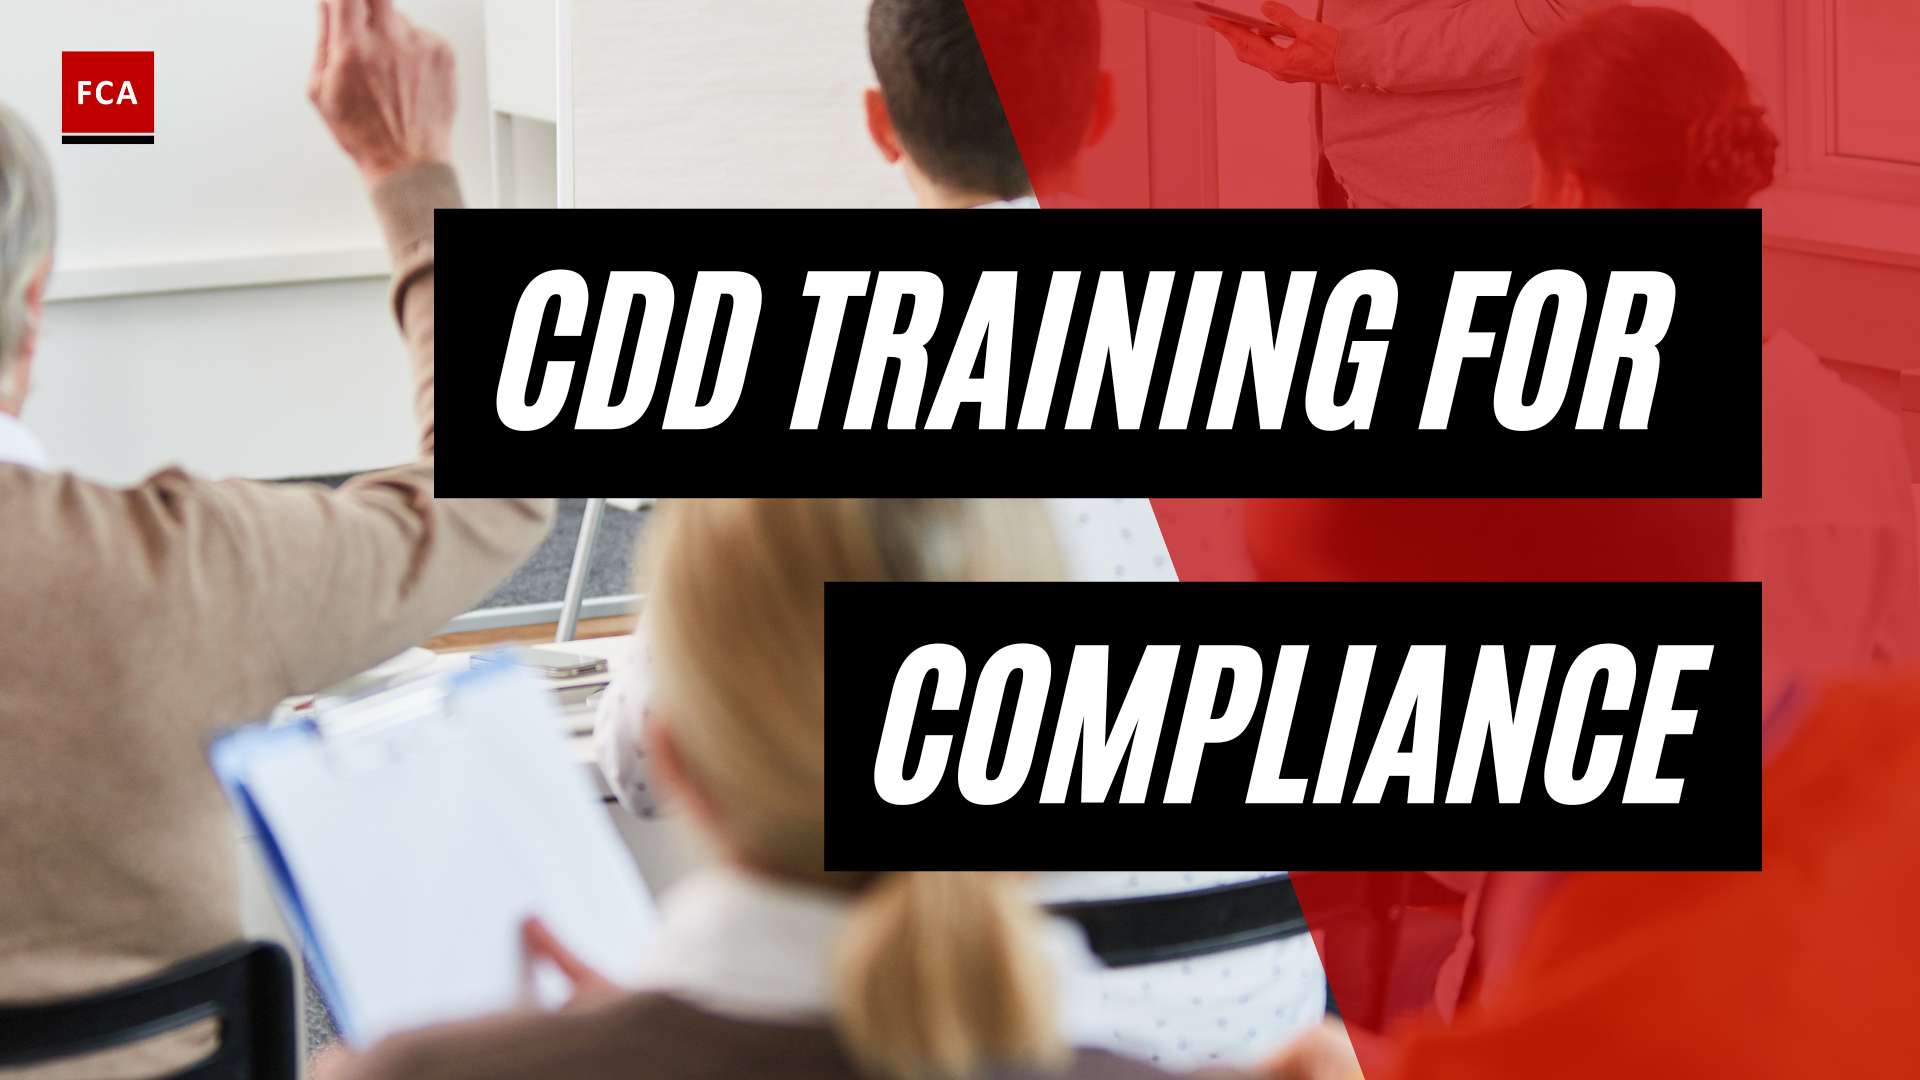 Transforming Compliance: Harnessing The Power Of Cdd Training